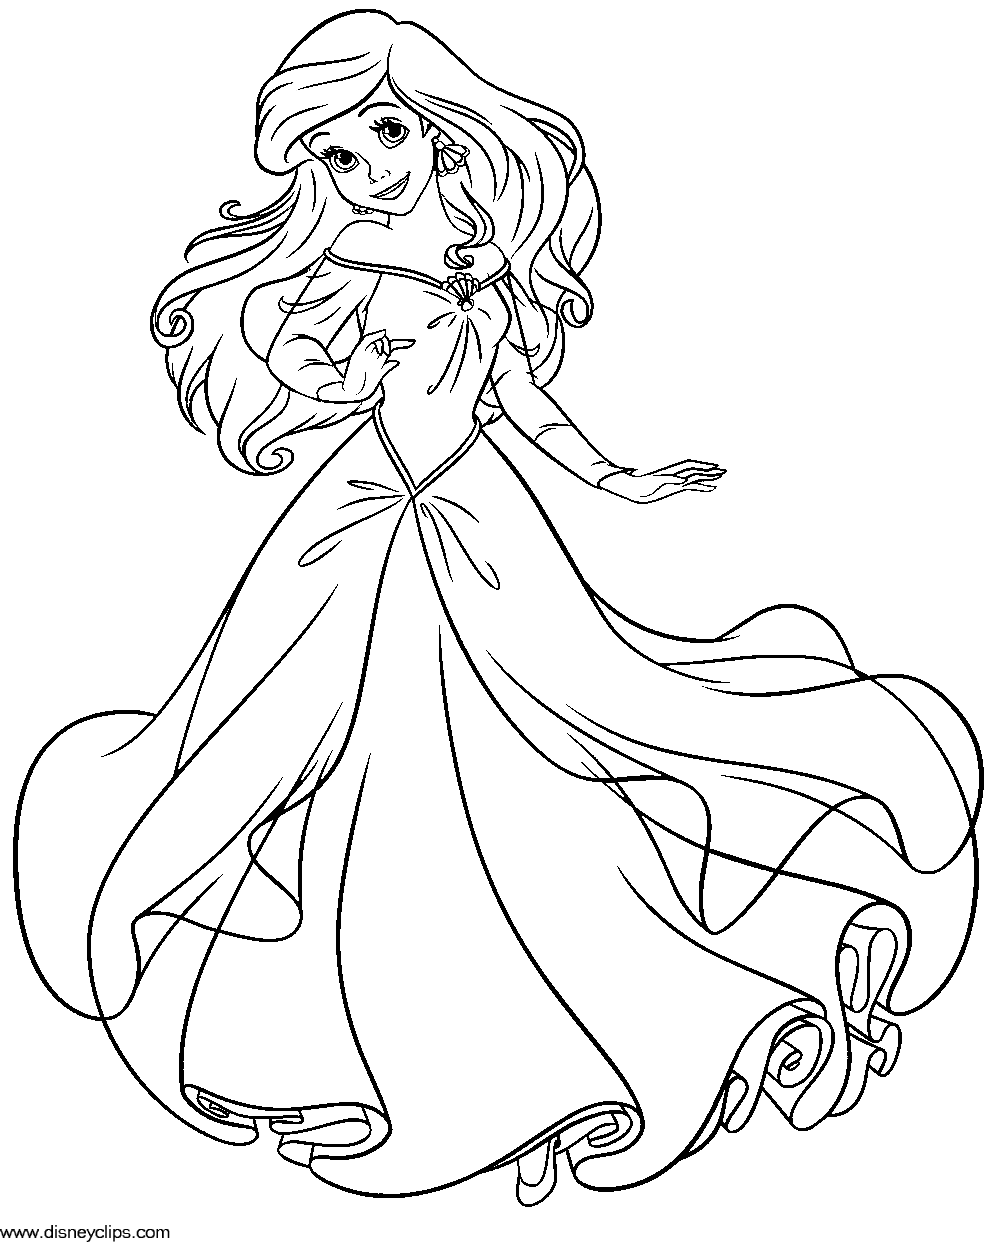 printable little mermaid the little mermaid coloring pages to download and print little printable mermaid 1 1